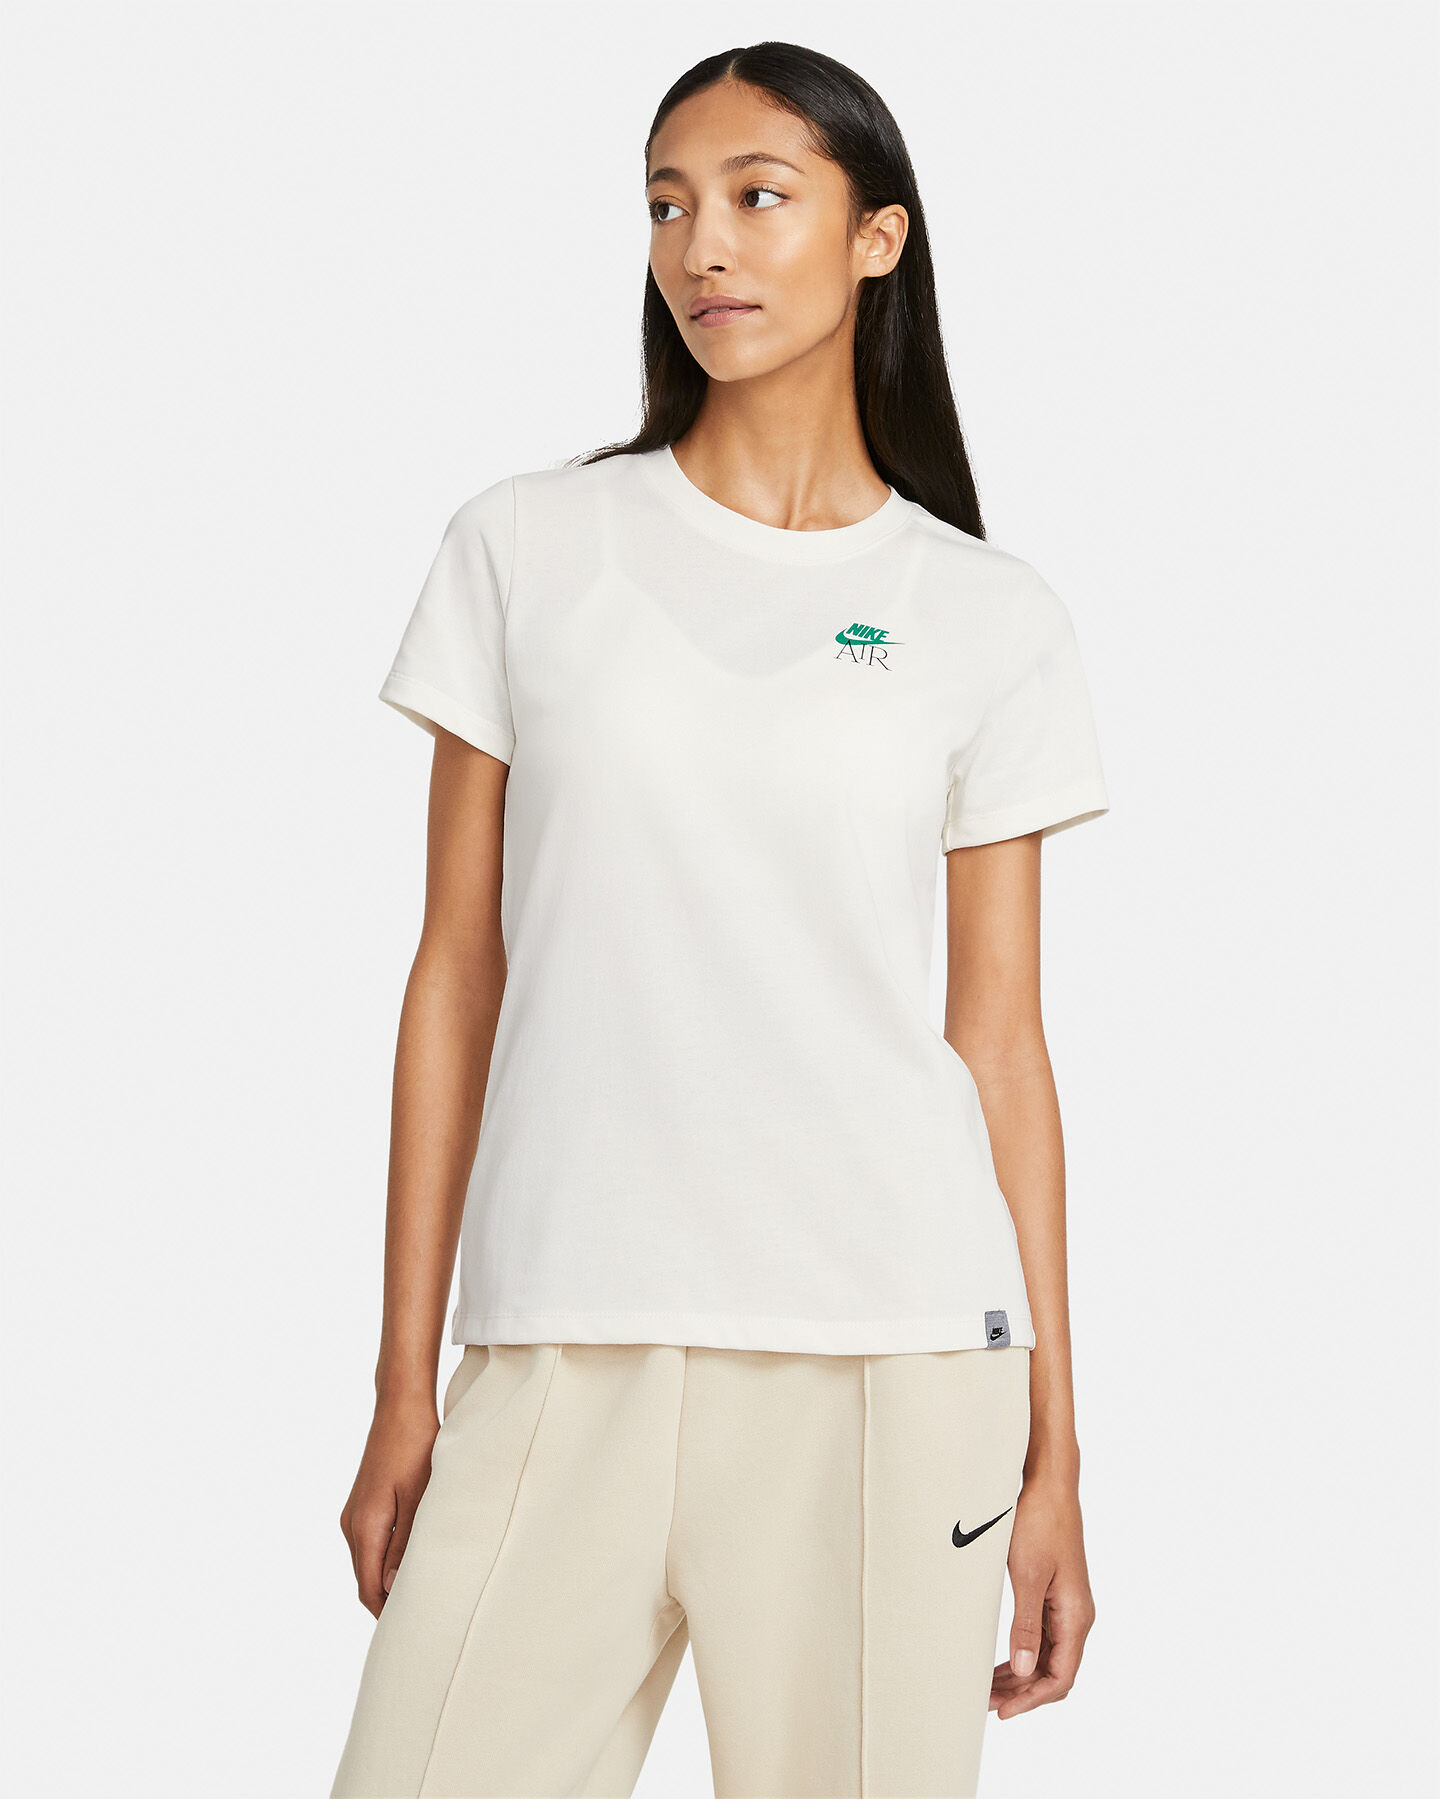  T-Shirt NIKE LOGO EARTH DAY W S5267755|901|XS scatto 0